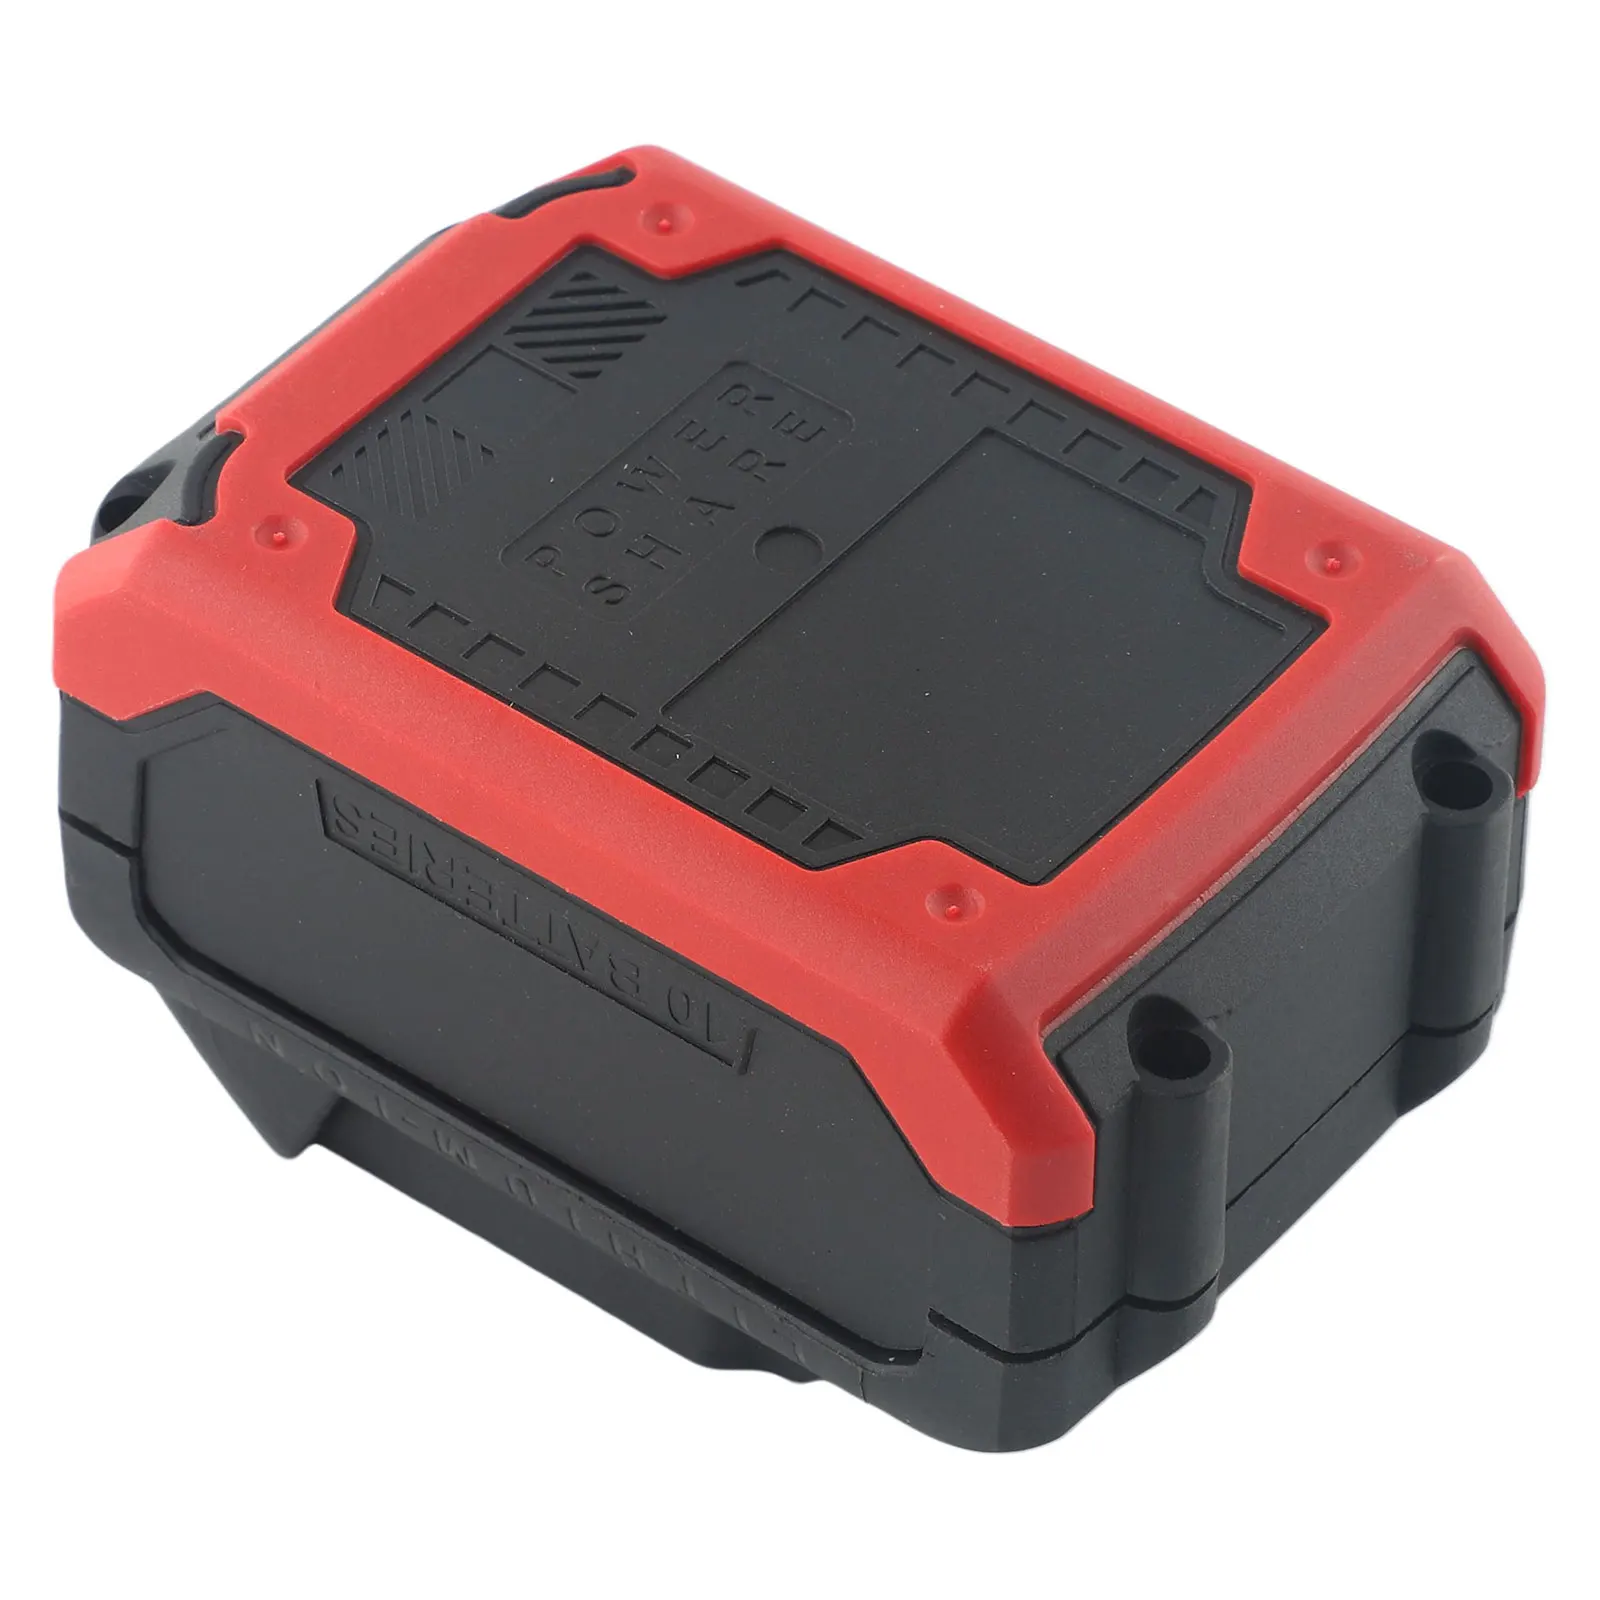 Cores Plastic Battery Case Storage Box Shell PCB Charging Board For Makita Battery Case Power Tool Accessories